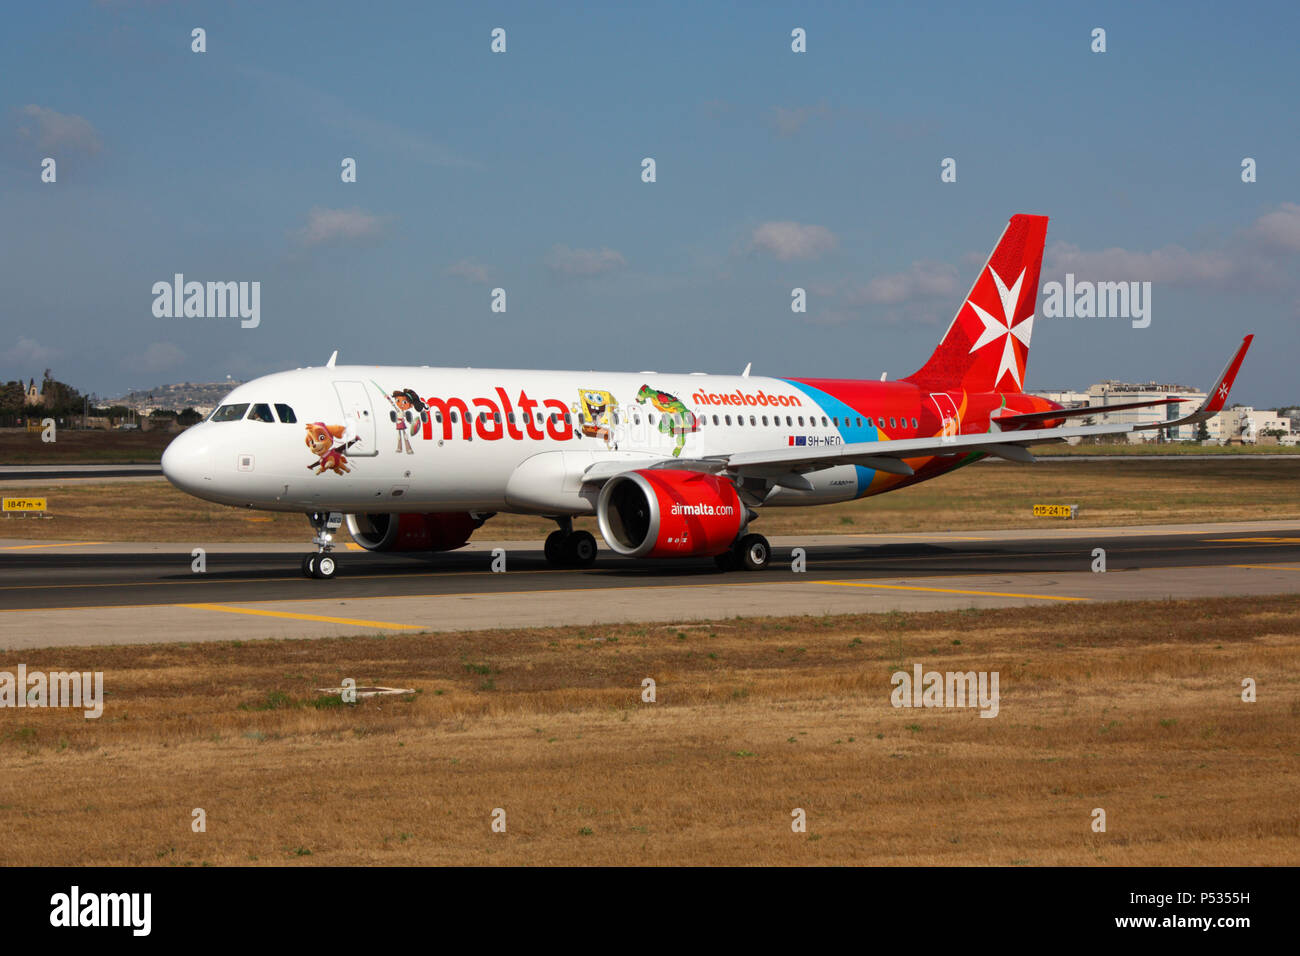 Air Malta Airbus A320neo commercial jet plane taxiing for departure from Malta. Advanced technology in modern civil aviation. Stock Photo